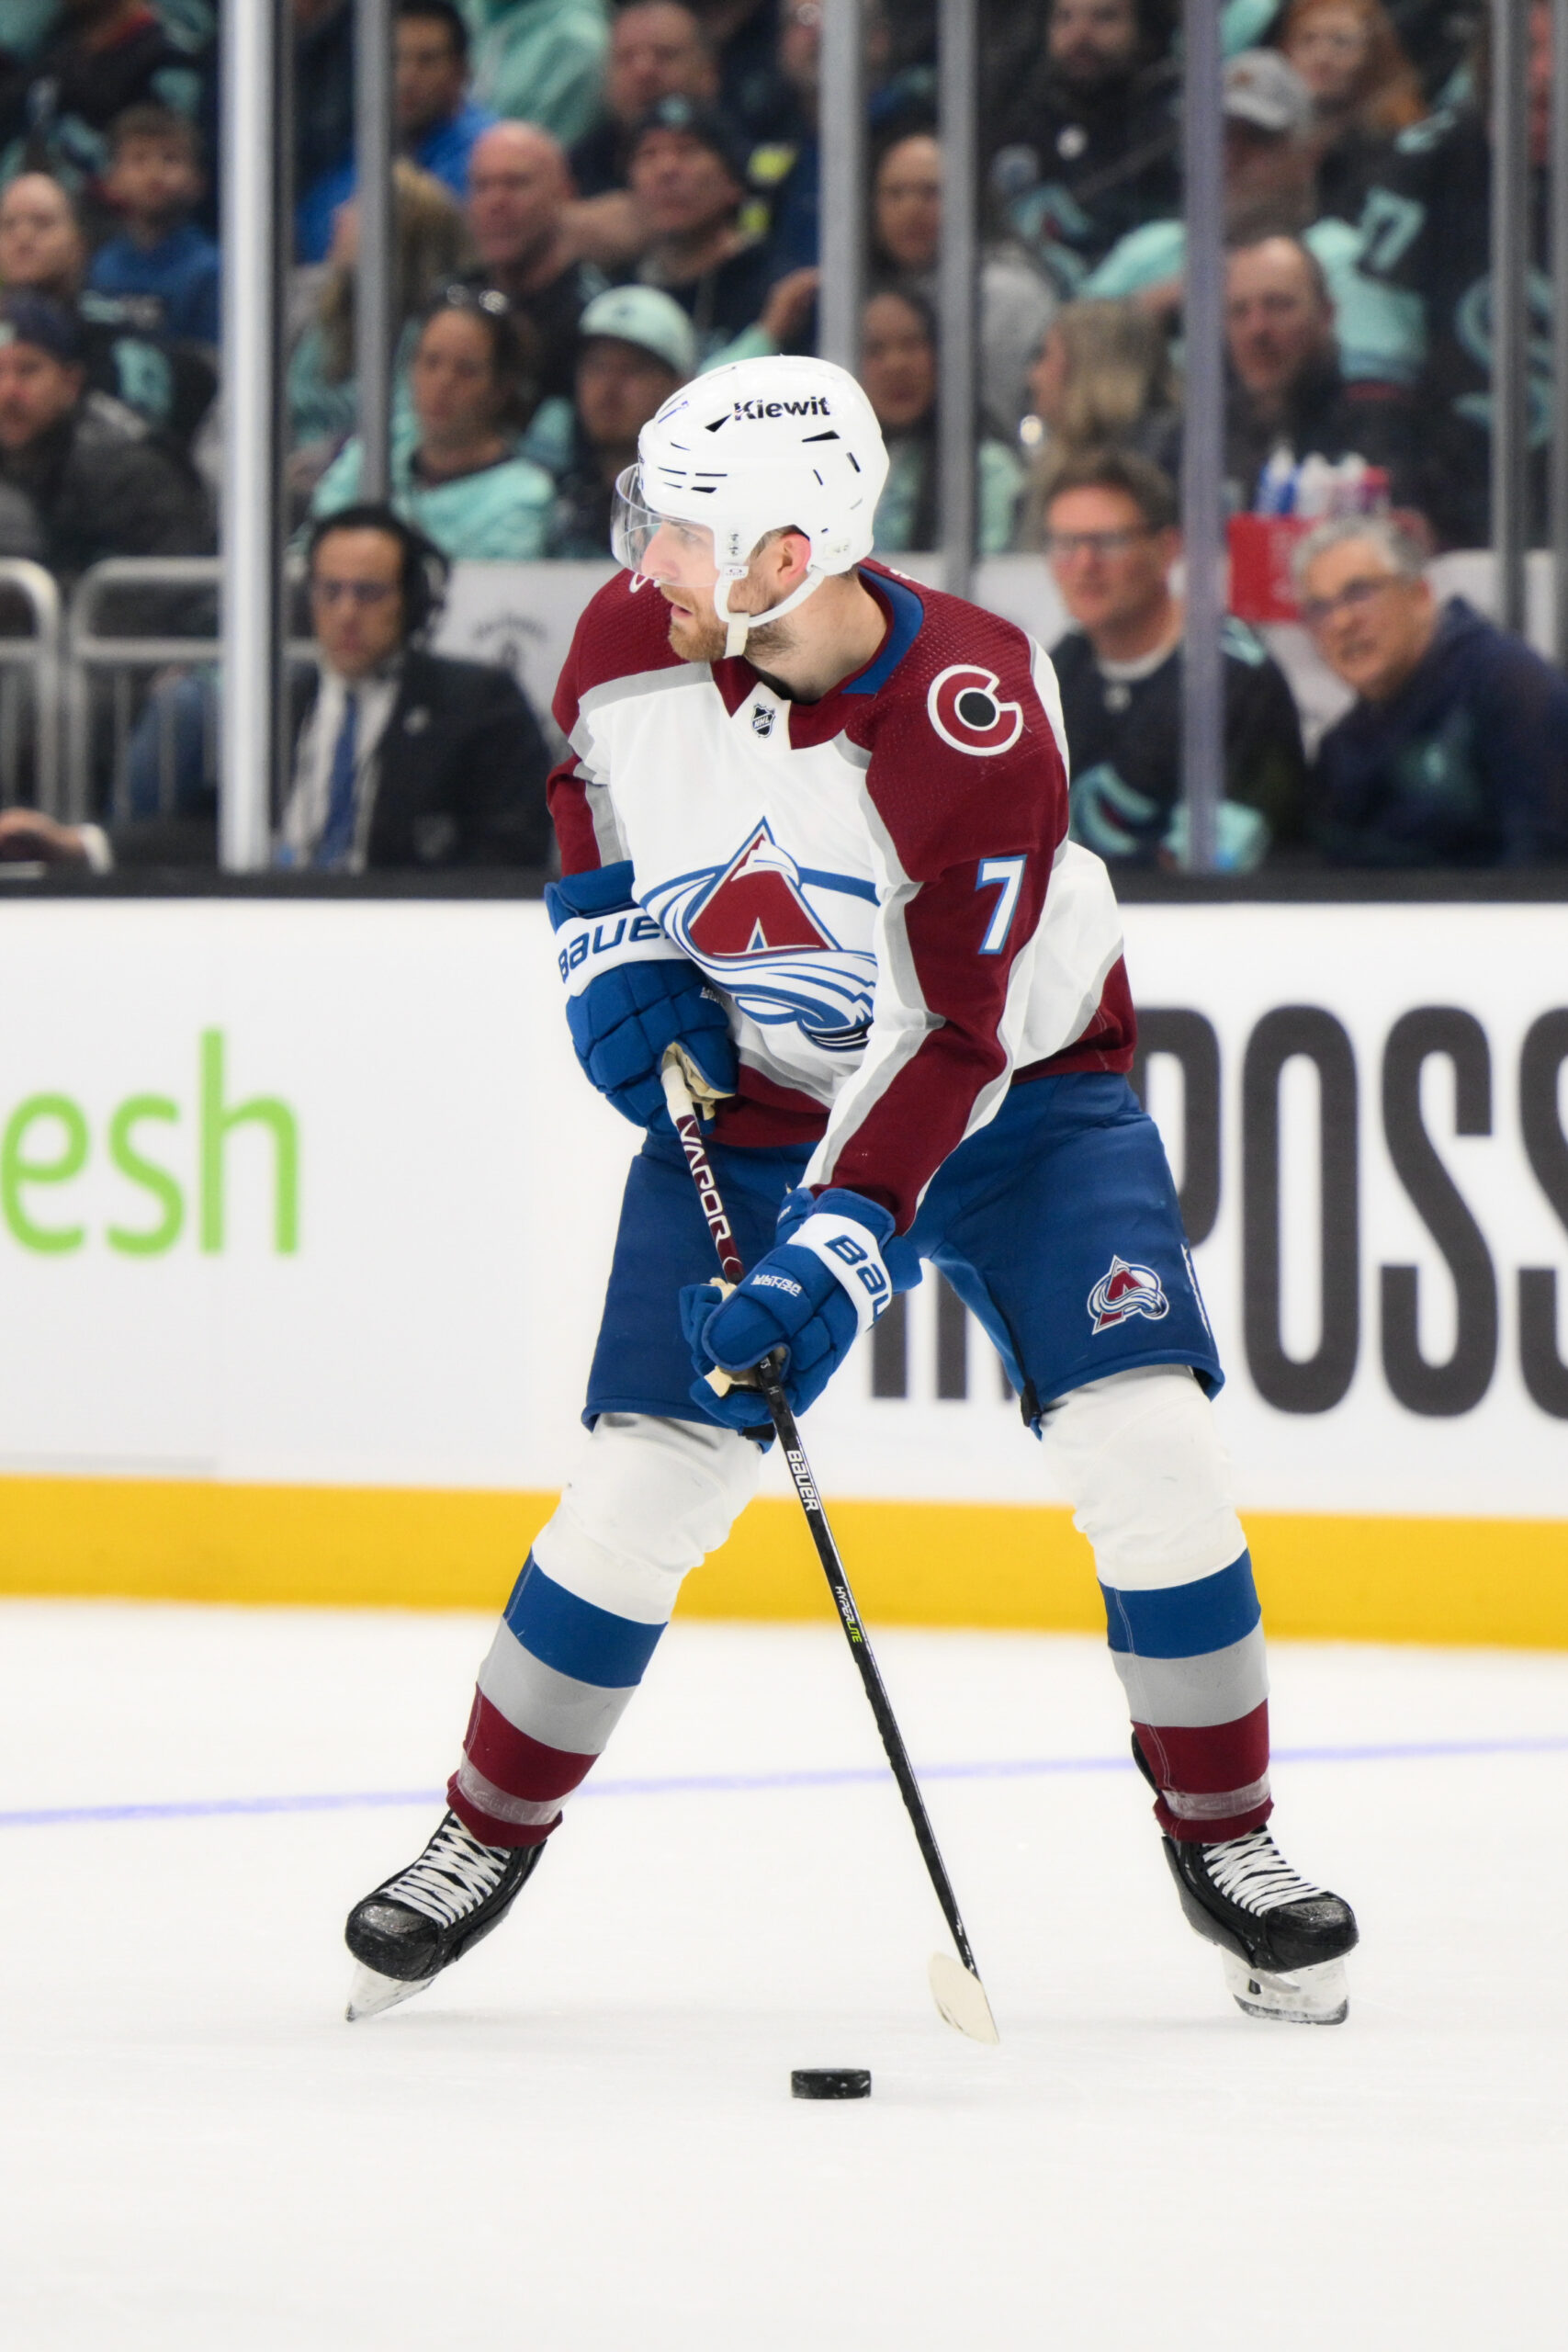 Colorado Avalanche agree to terms on a new contract with Mikko Rantanen -  Mile High Hockey